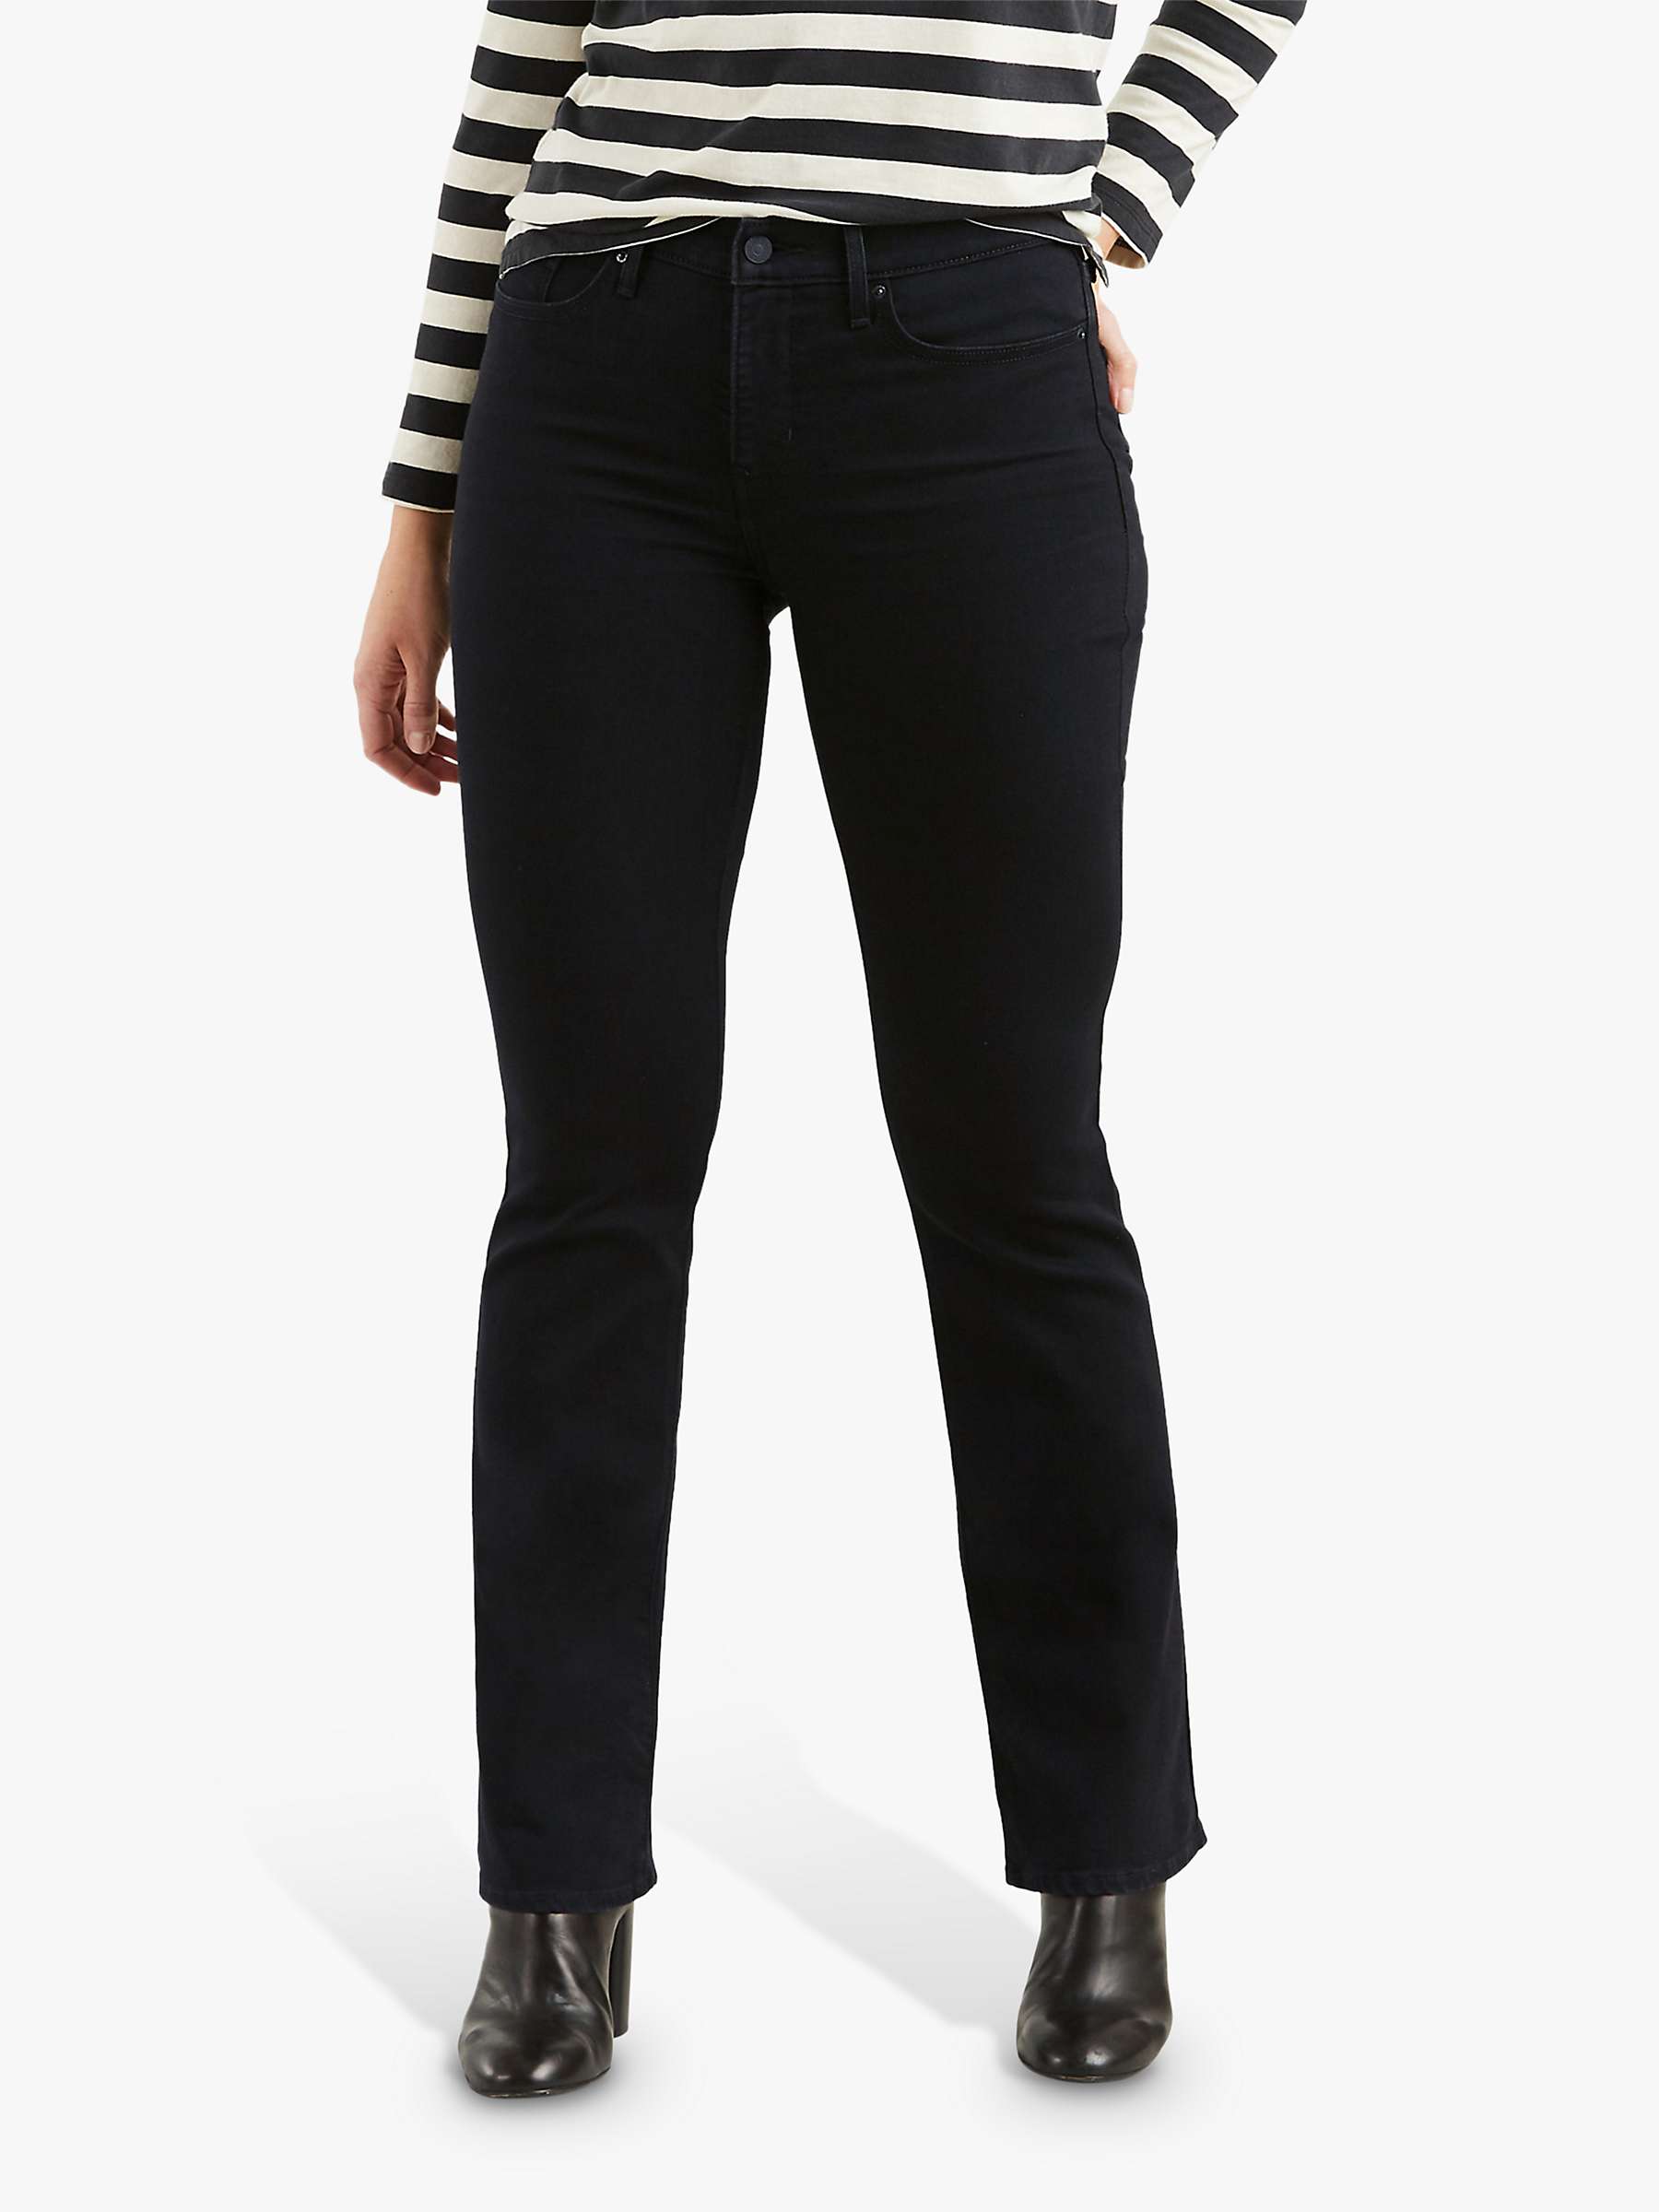 Buy Levi's 315 Shaping Bootcut Jeans, Soft Black Online at johnlewis.com